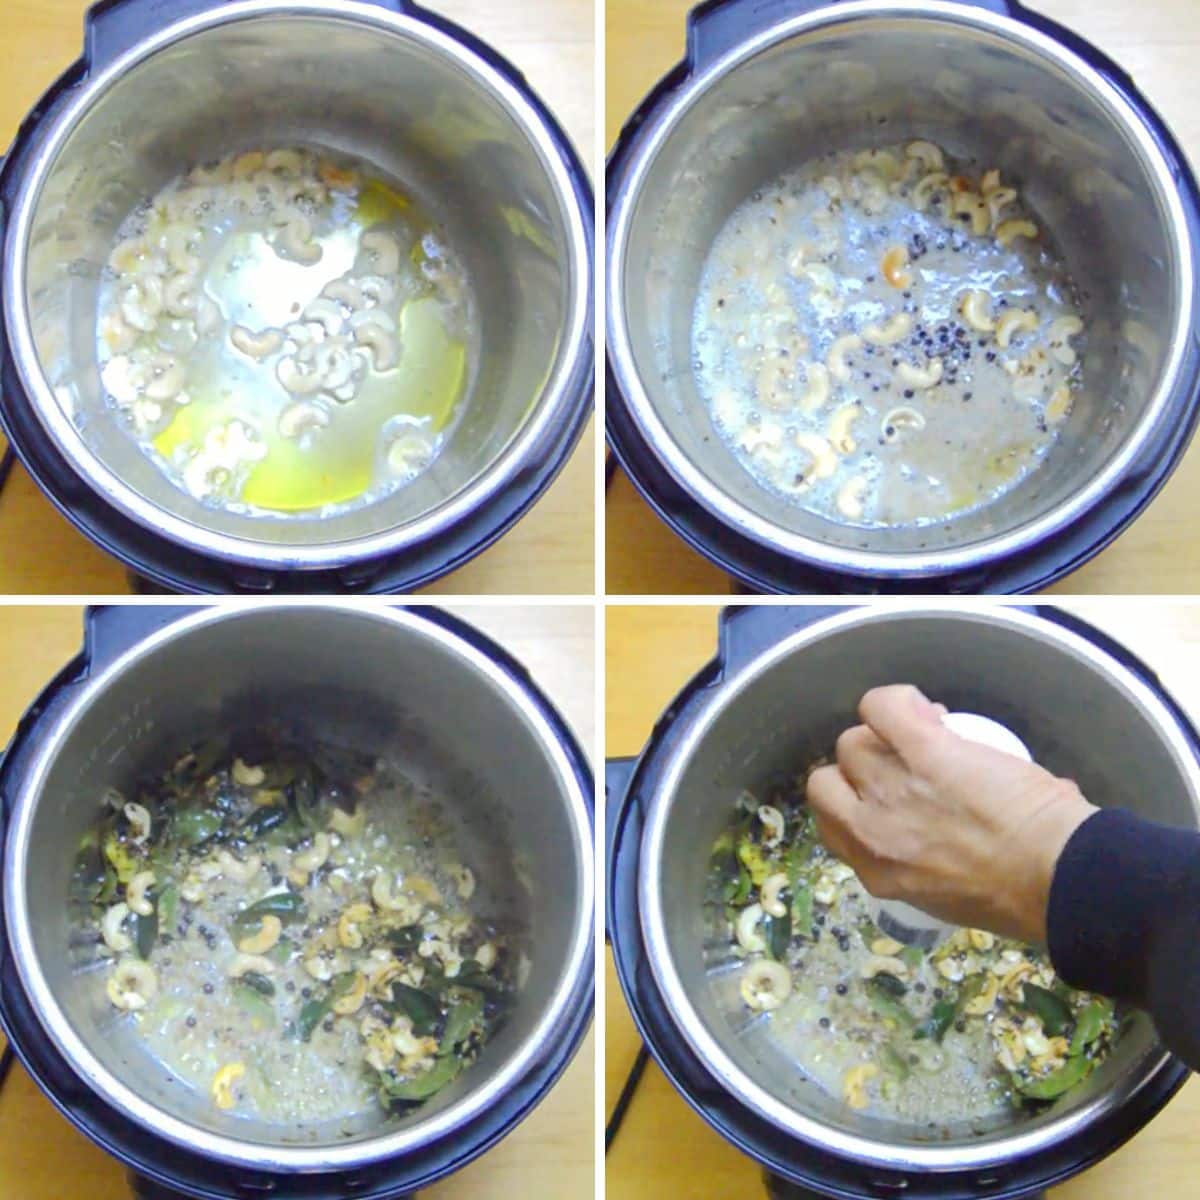 college of 4 images showing the process of frying cashews, spices and curry leaves in oil in an instant pot.